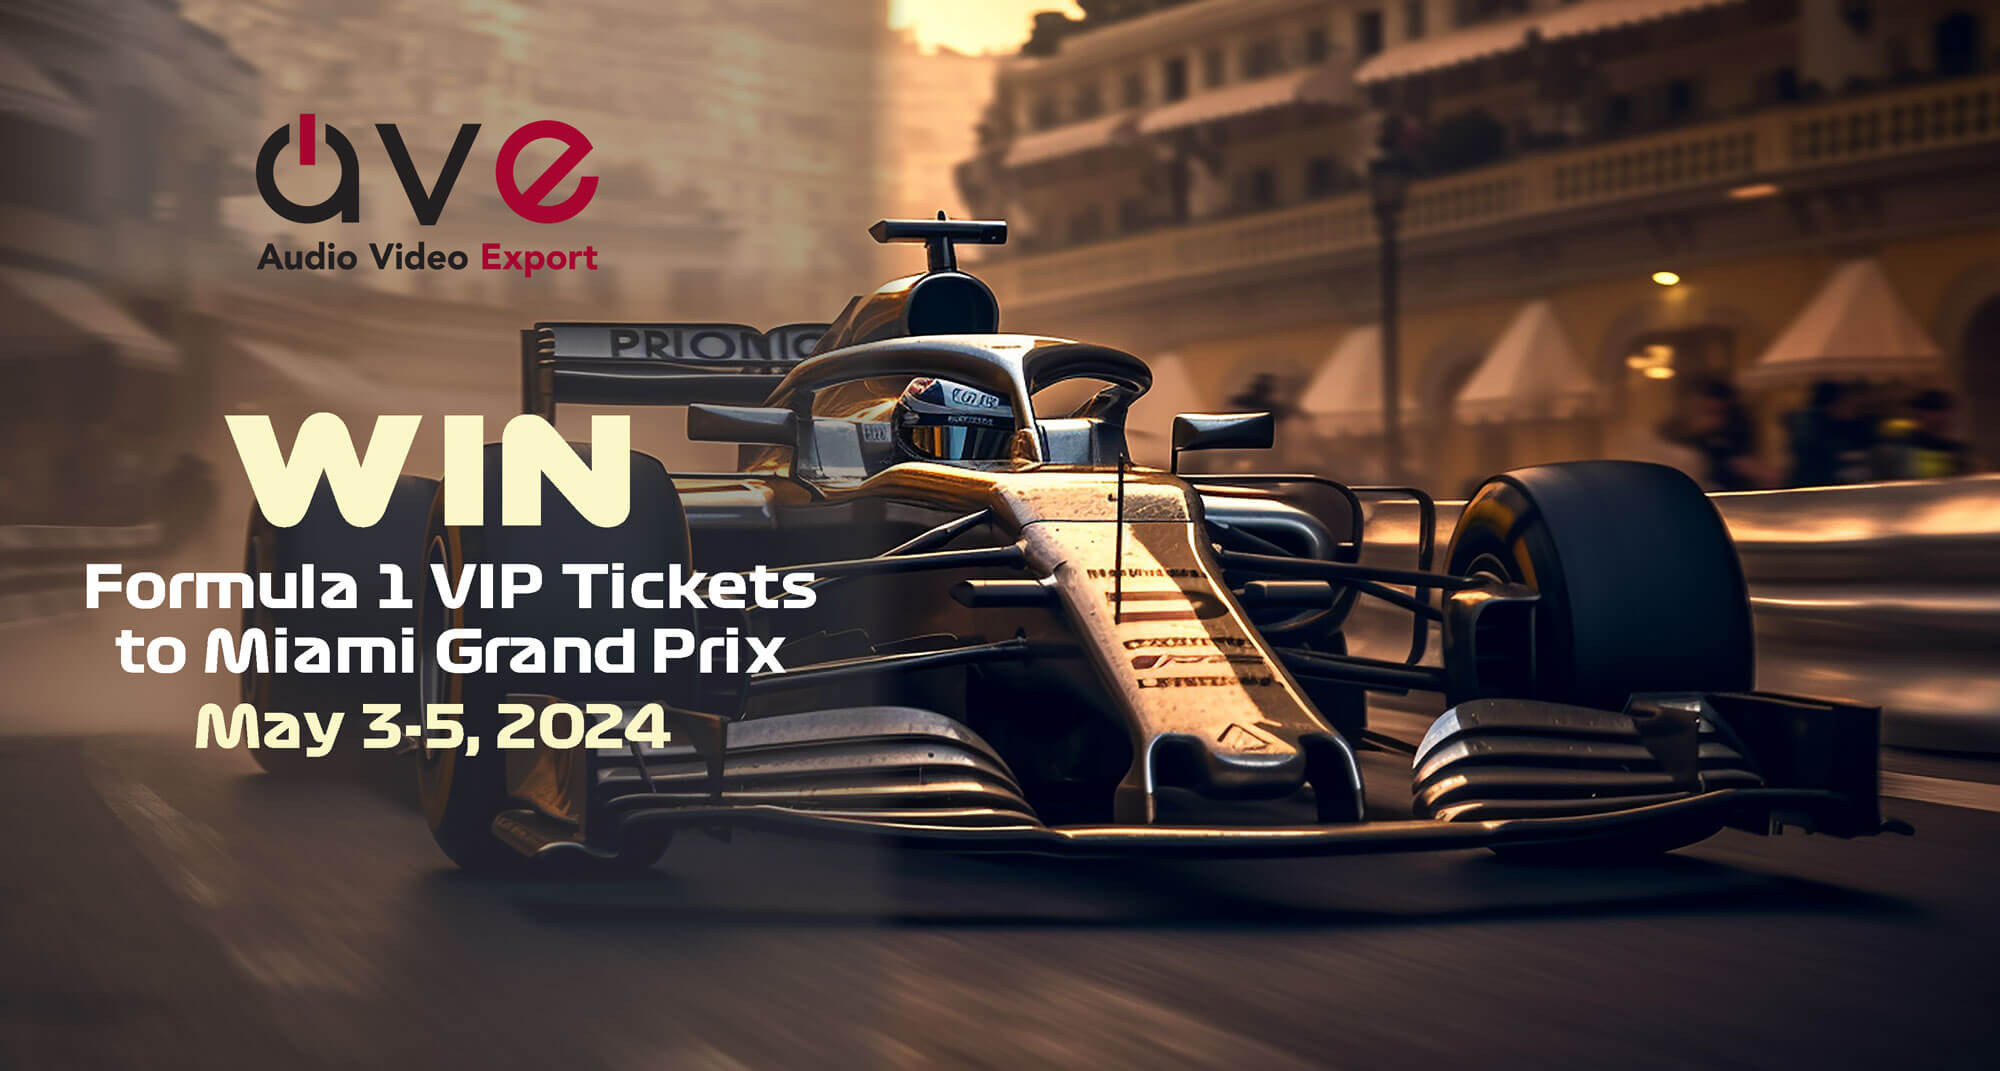 Join the Race to Win Formula 1 VIP Tickets with Audio Video Export (AVE) F1 Sales Challenge!